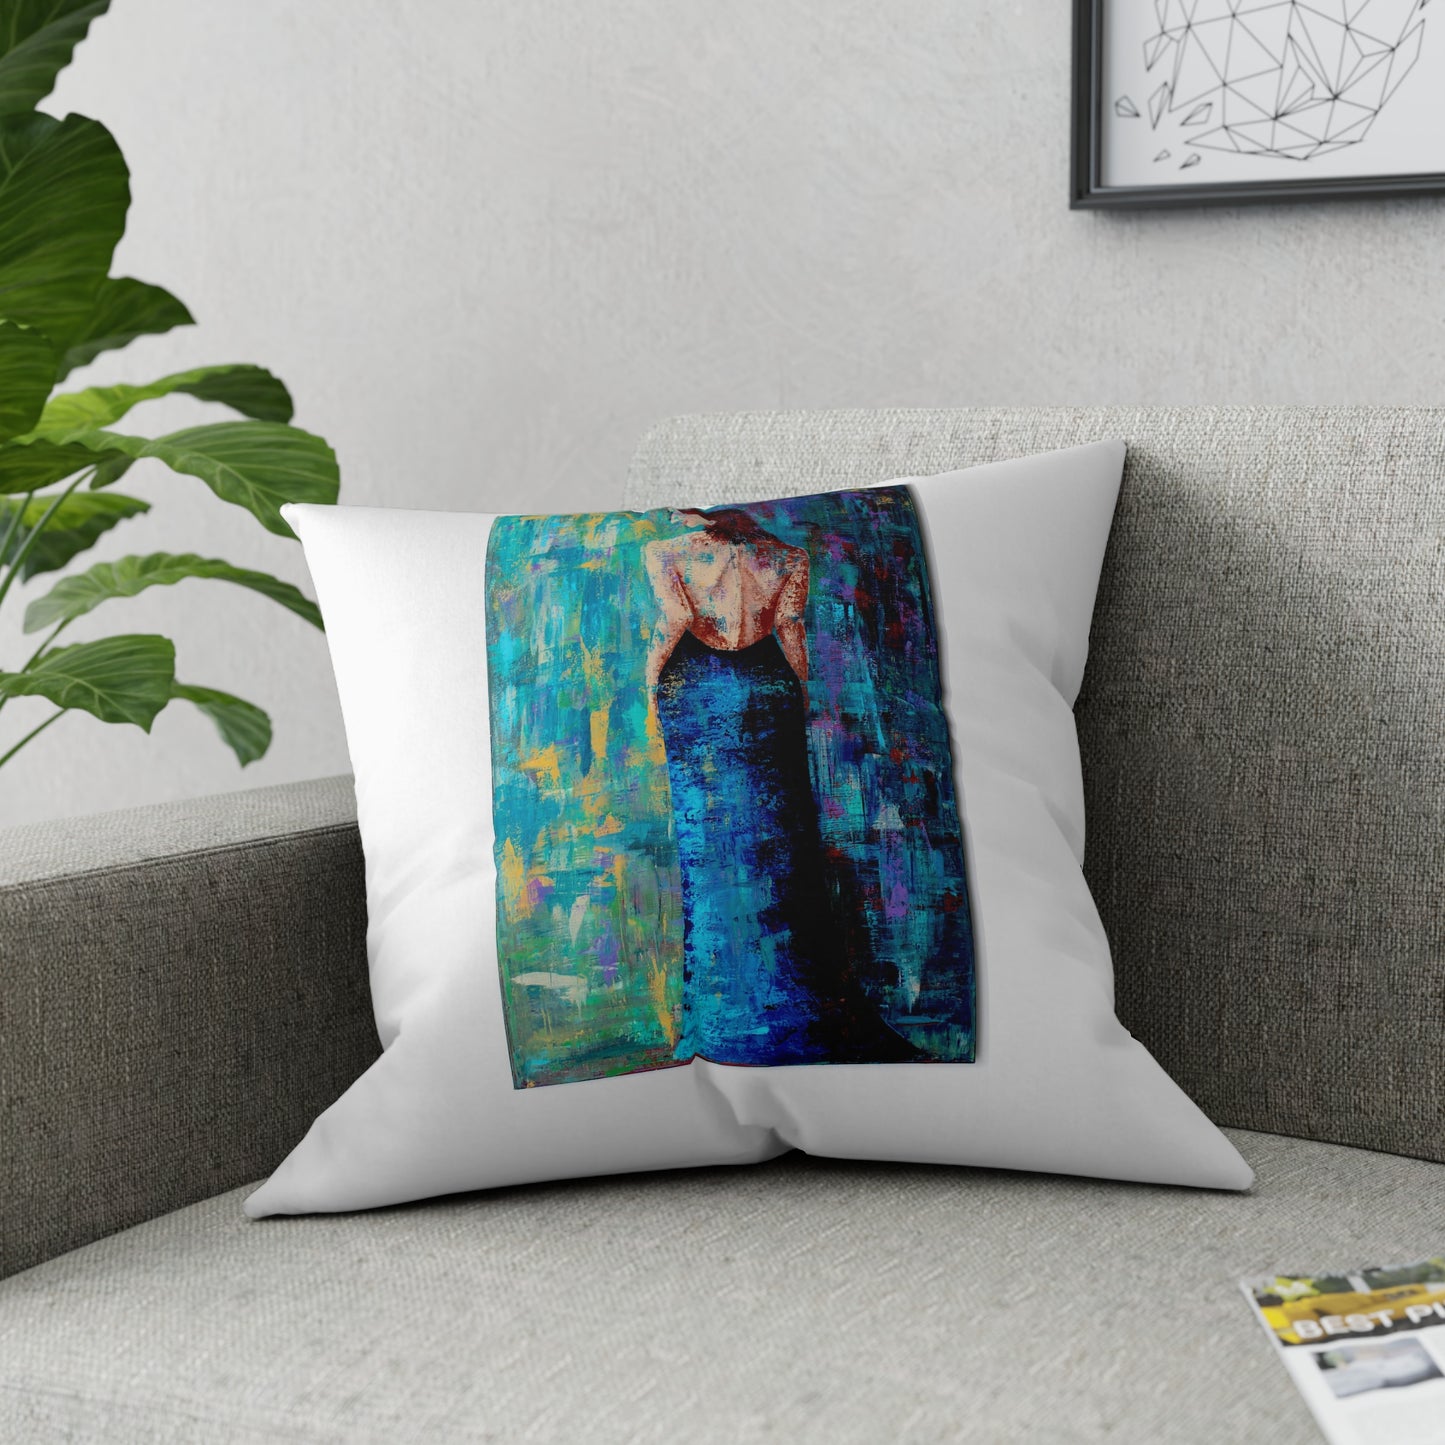 Decorative Pillow Lady in Blue -  White broadcloth with Poem